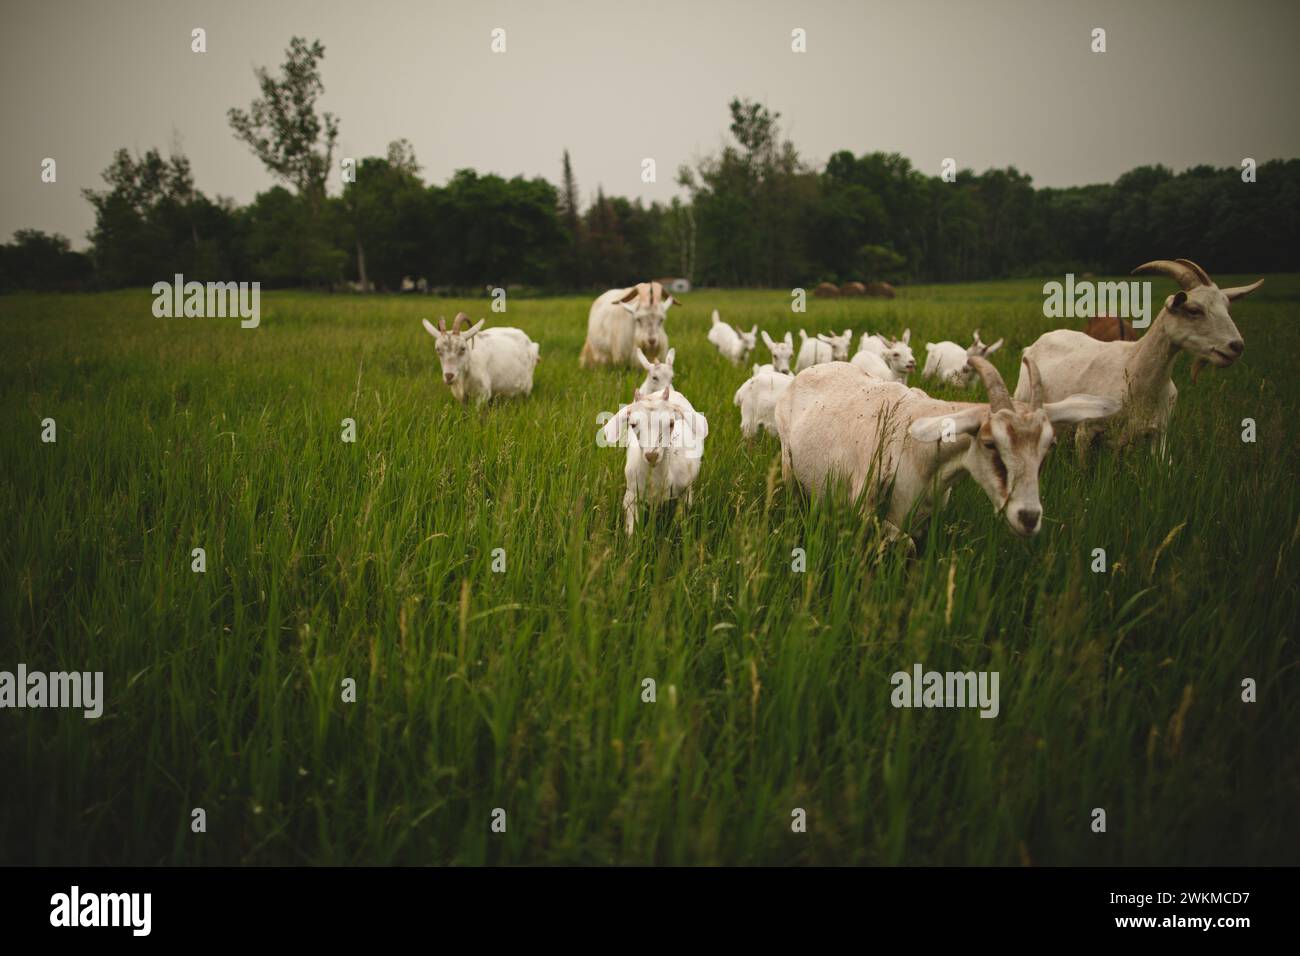 Numerous goats in lush field with tall green grass and trees Stock Photo